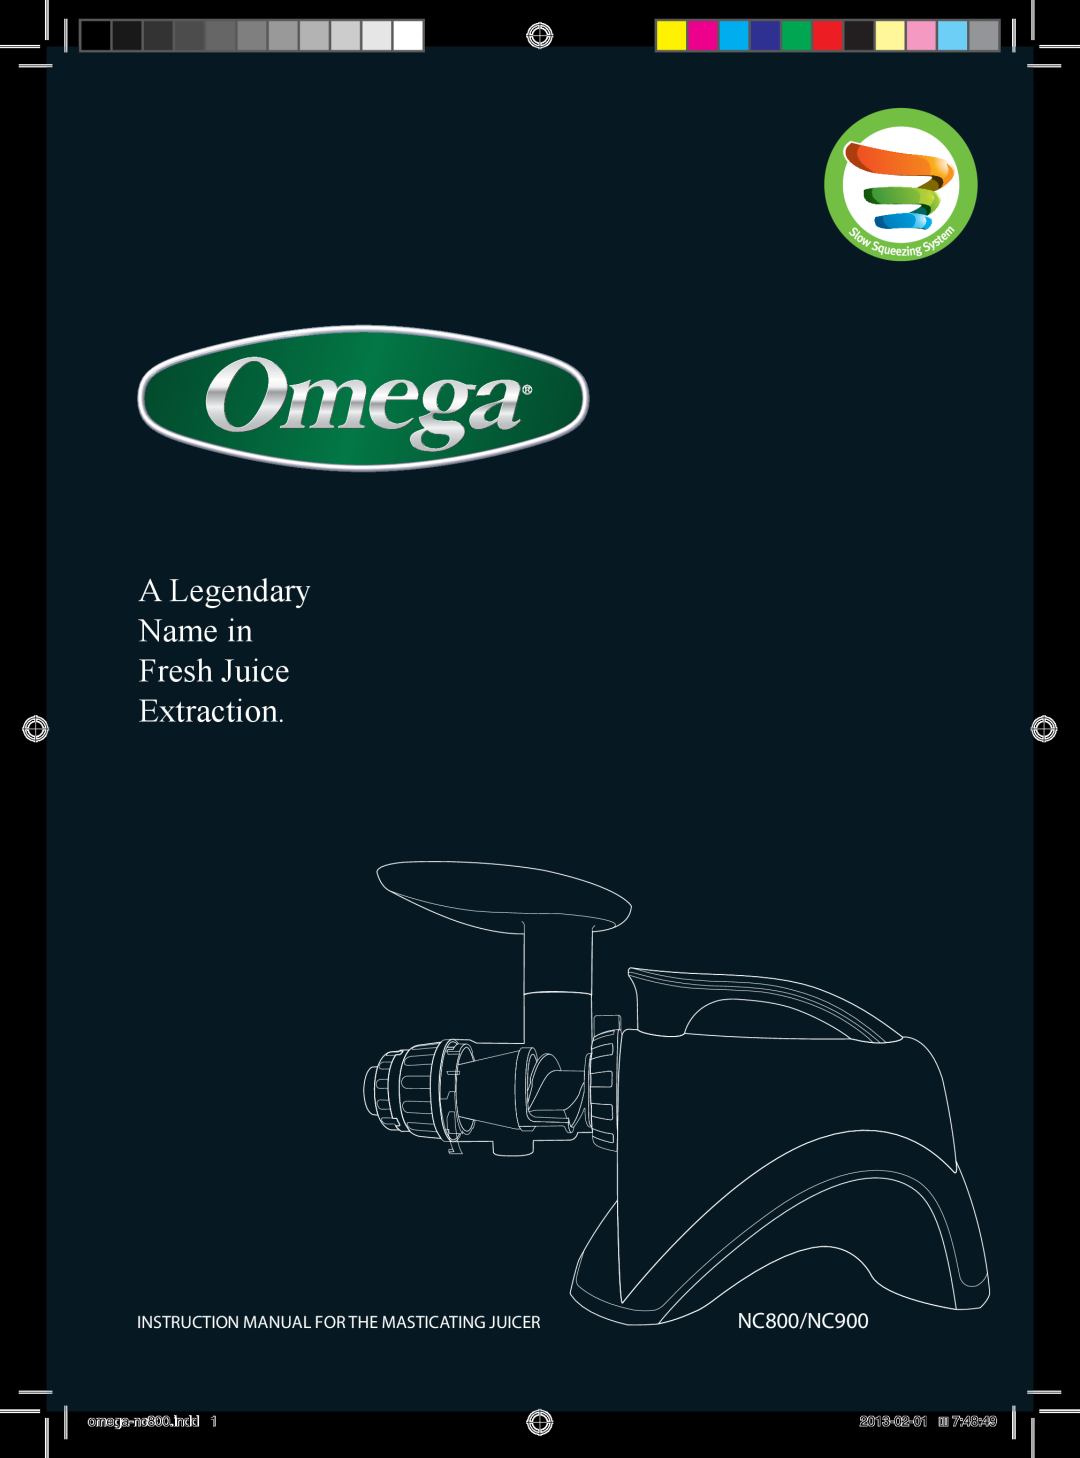 Omega NC900 instruction manual ALegendary Name in Fresh Juice Extraction, Instruction Manual For The Masticating Juicer 